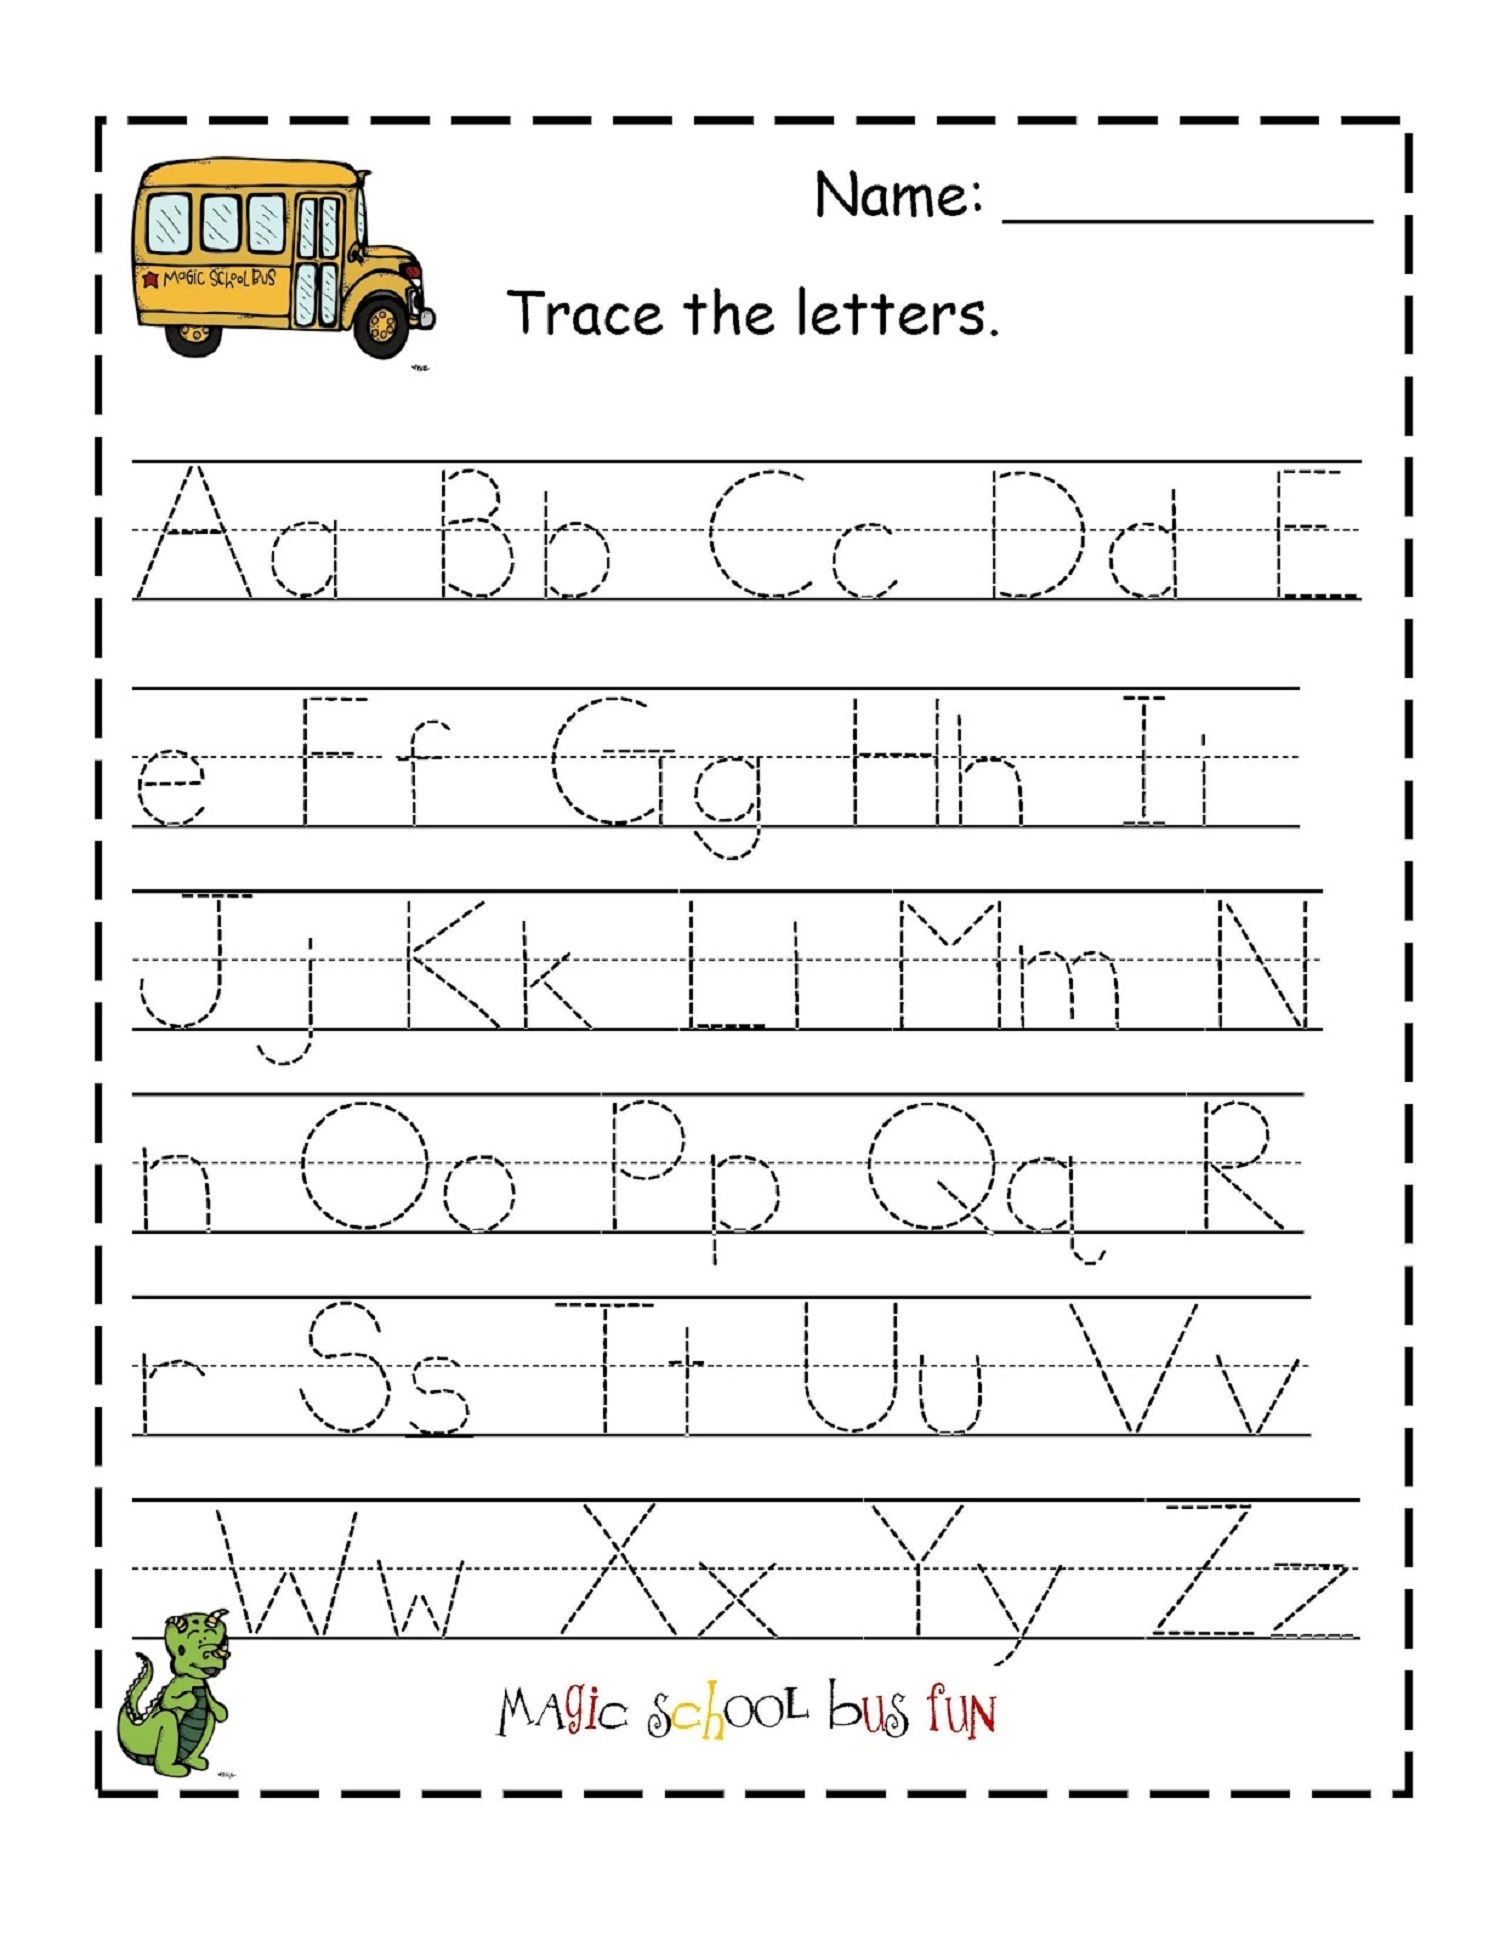 Traceable Alphabet For Learning Exercise | Letter Tracing throughout Abc Alphabet Tracing Letters